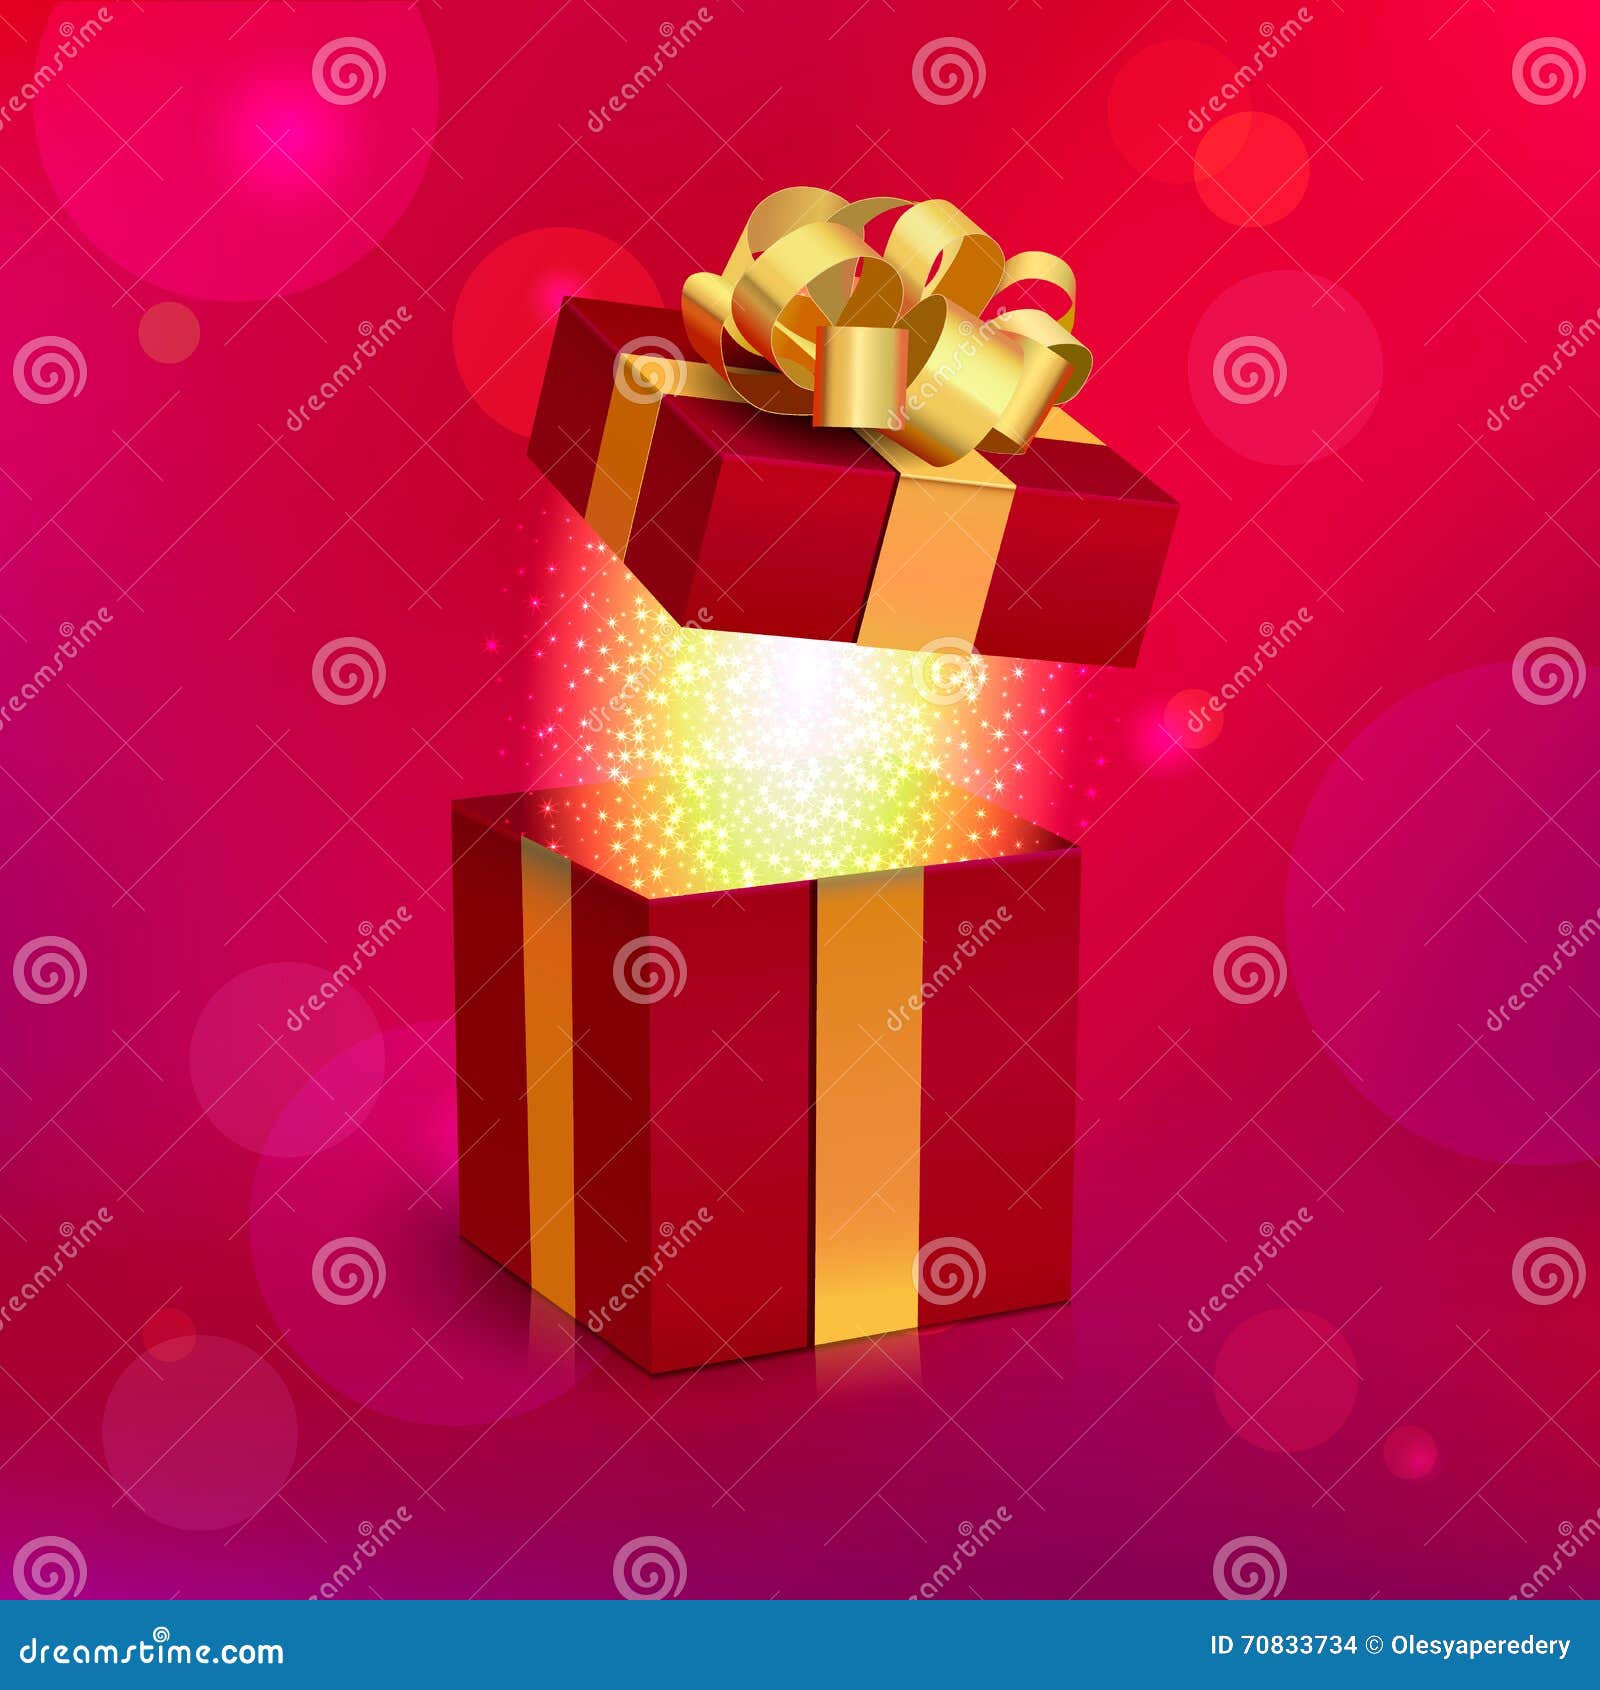 Vector White Square Gift Box With Light Green Ribbon Bow Stock Illustration  - Download Image Now - iStock